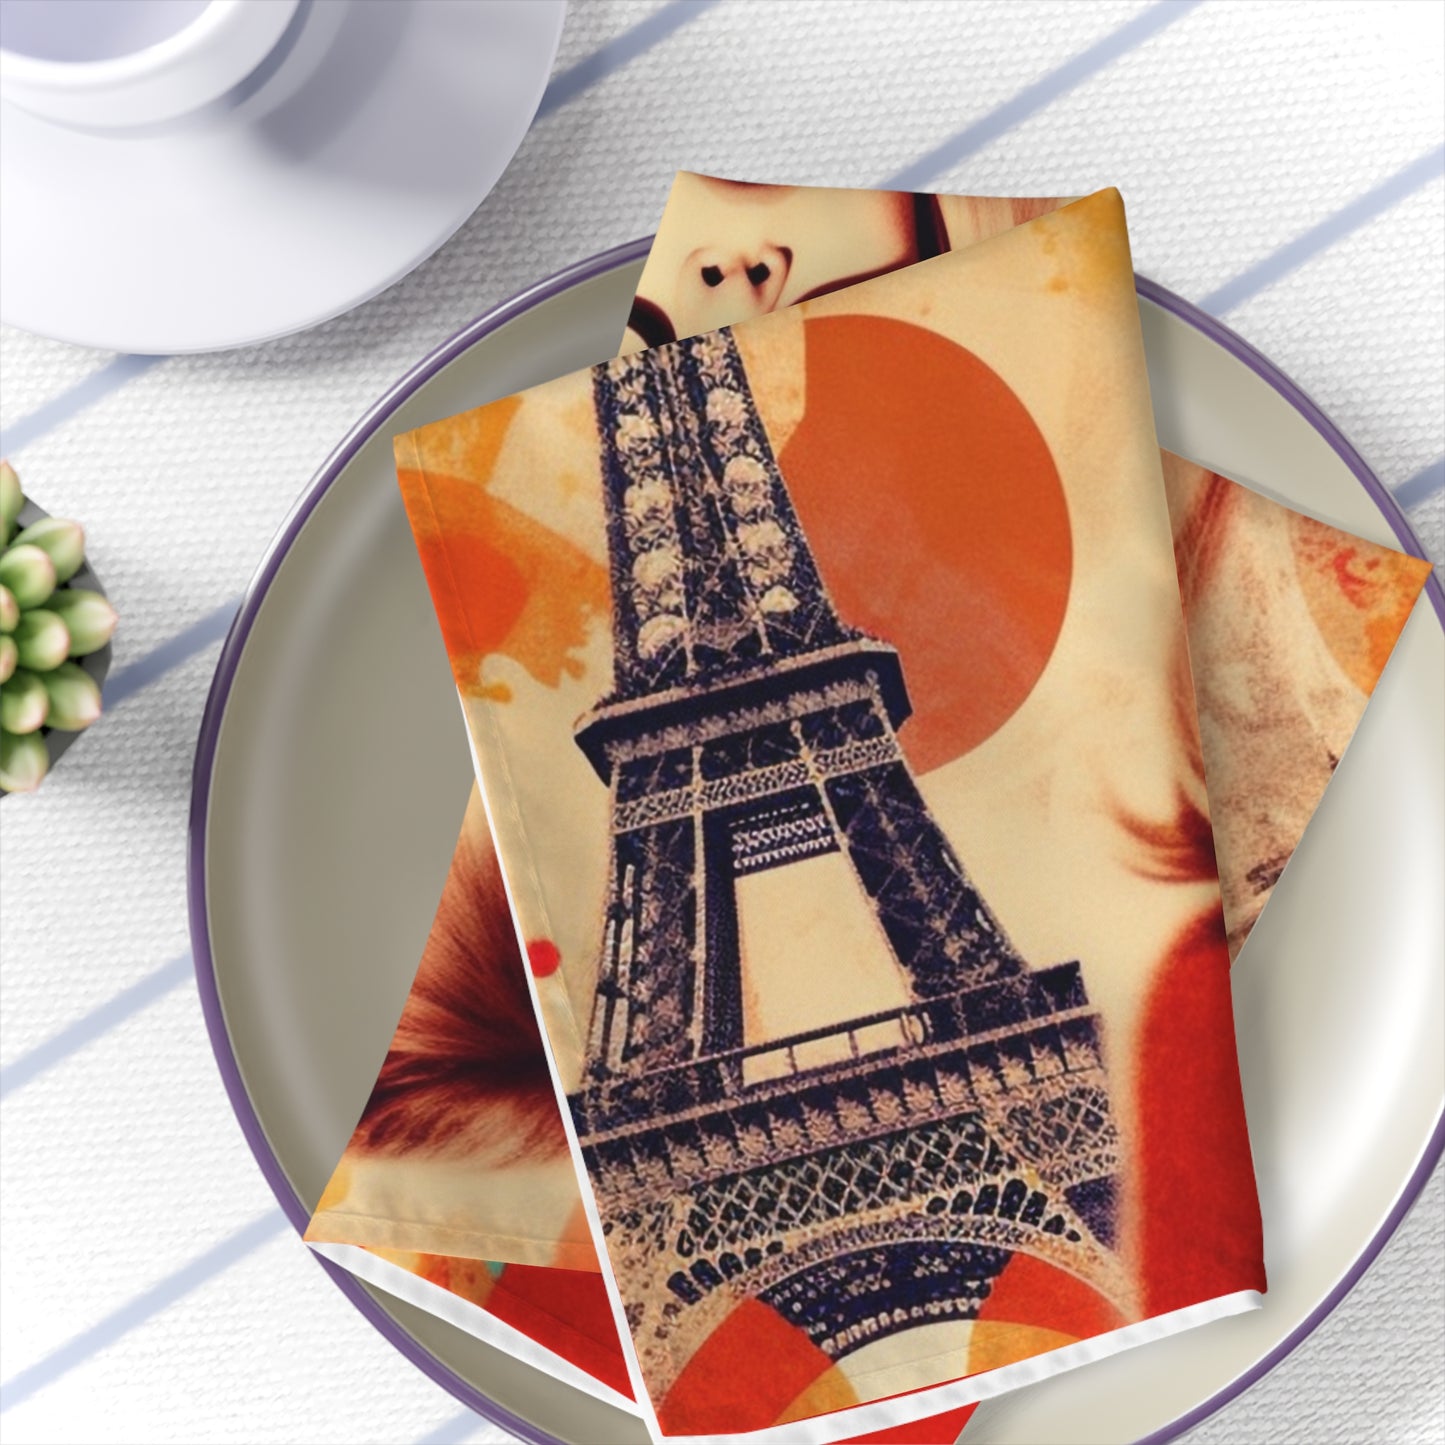 TOUR EIFFEL Serviette Napkin set (4), French, Couture, Pop Art, Travel, Fashion, Cuisine, Cook, Chef, Tableware, deluxe, must have gift item